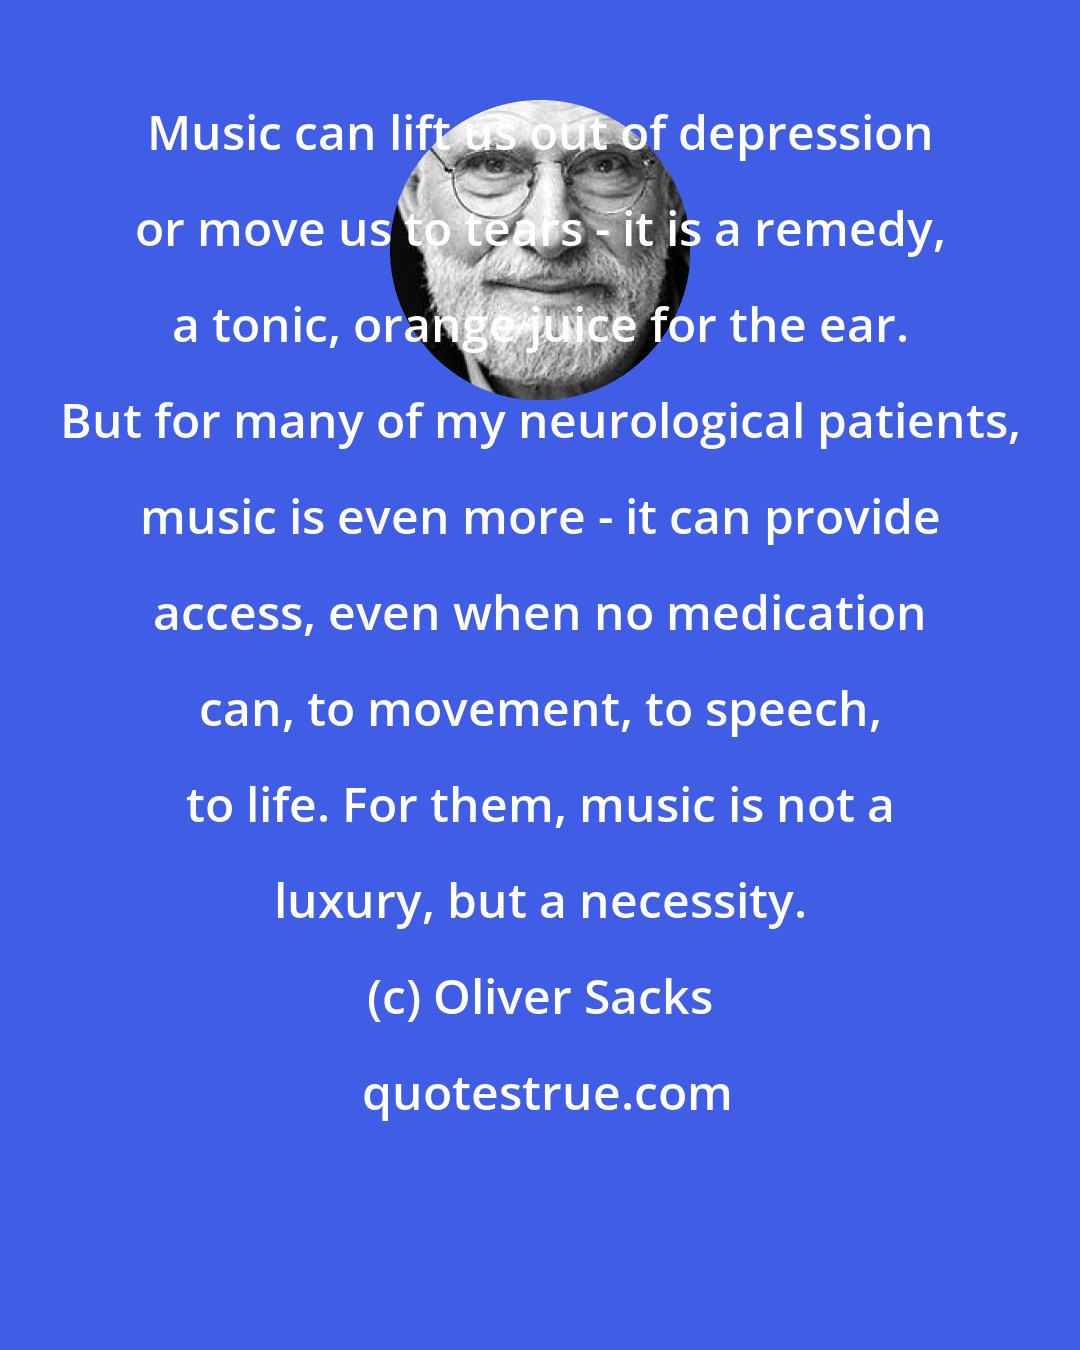 Oliver Sacks: Music can lift us out of depression or move us to tears - it is a remedy, a tonic, orange juice for the ear. But for many of my neurological patients, music is even more - it can provide access, even when no medication can, to movement, to speech, to life. For them, music is not a luxury, but a necessity.